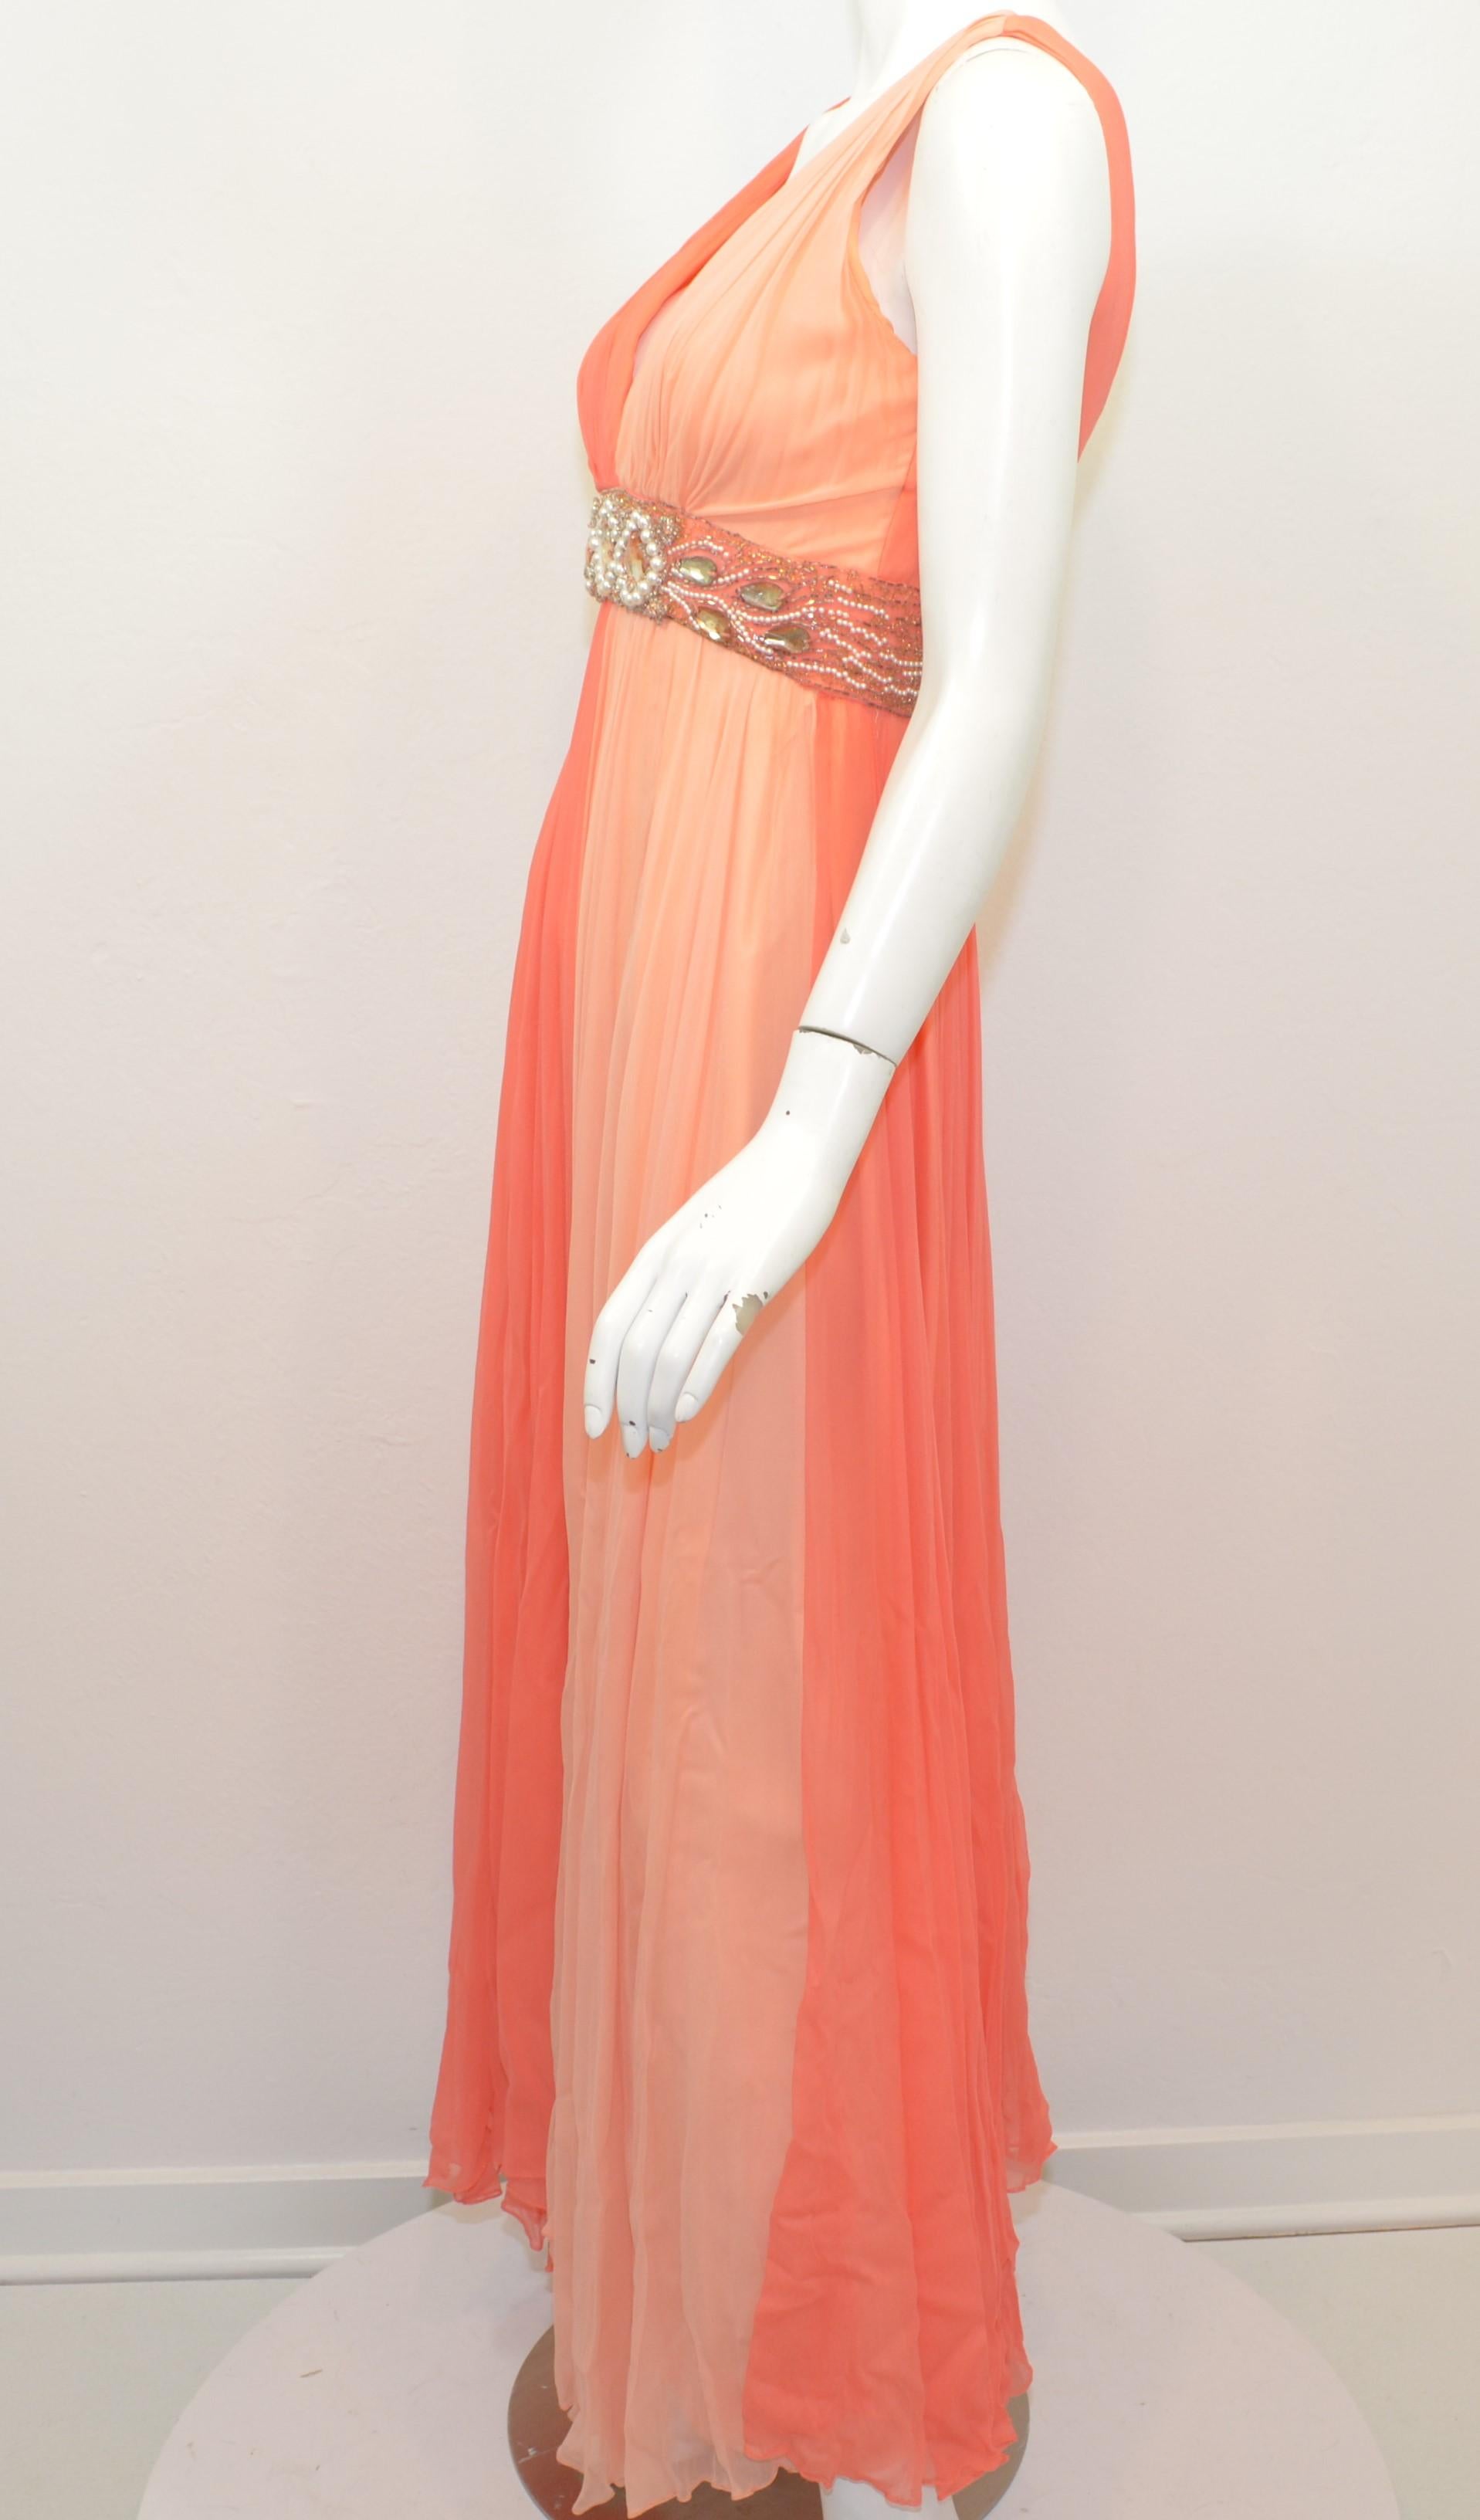 Women's 1950's Vintage Judd’s Coral Dress with Bead Embellishing